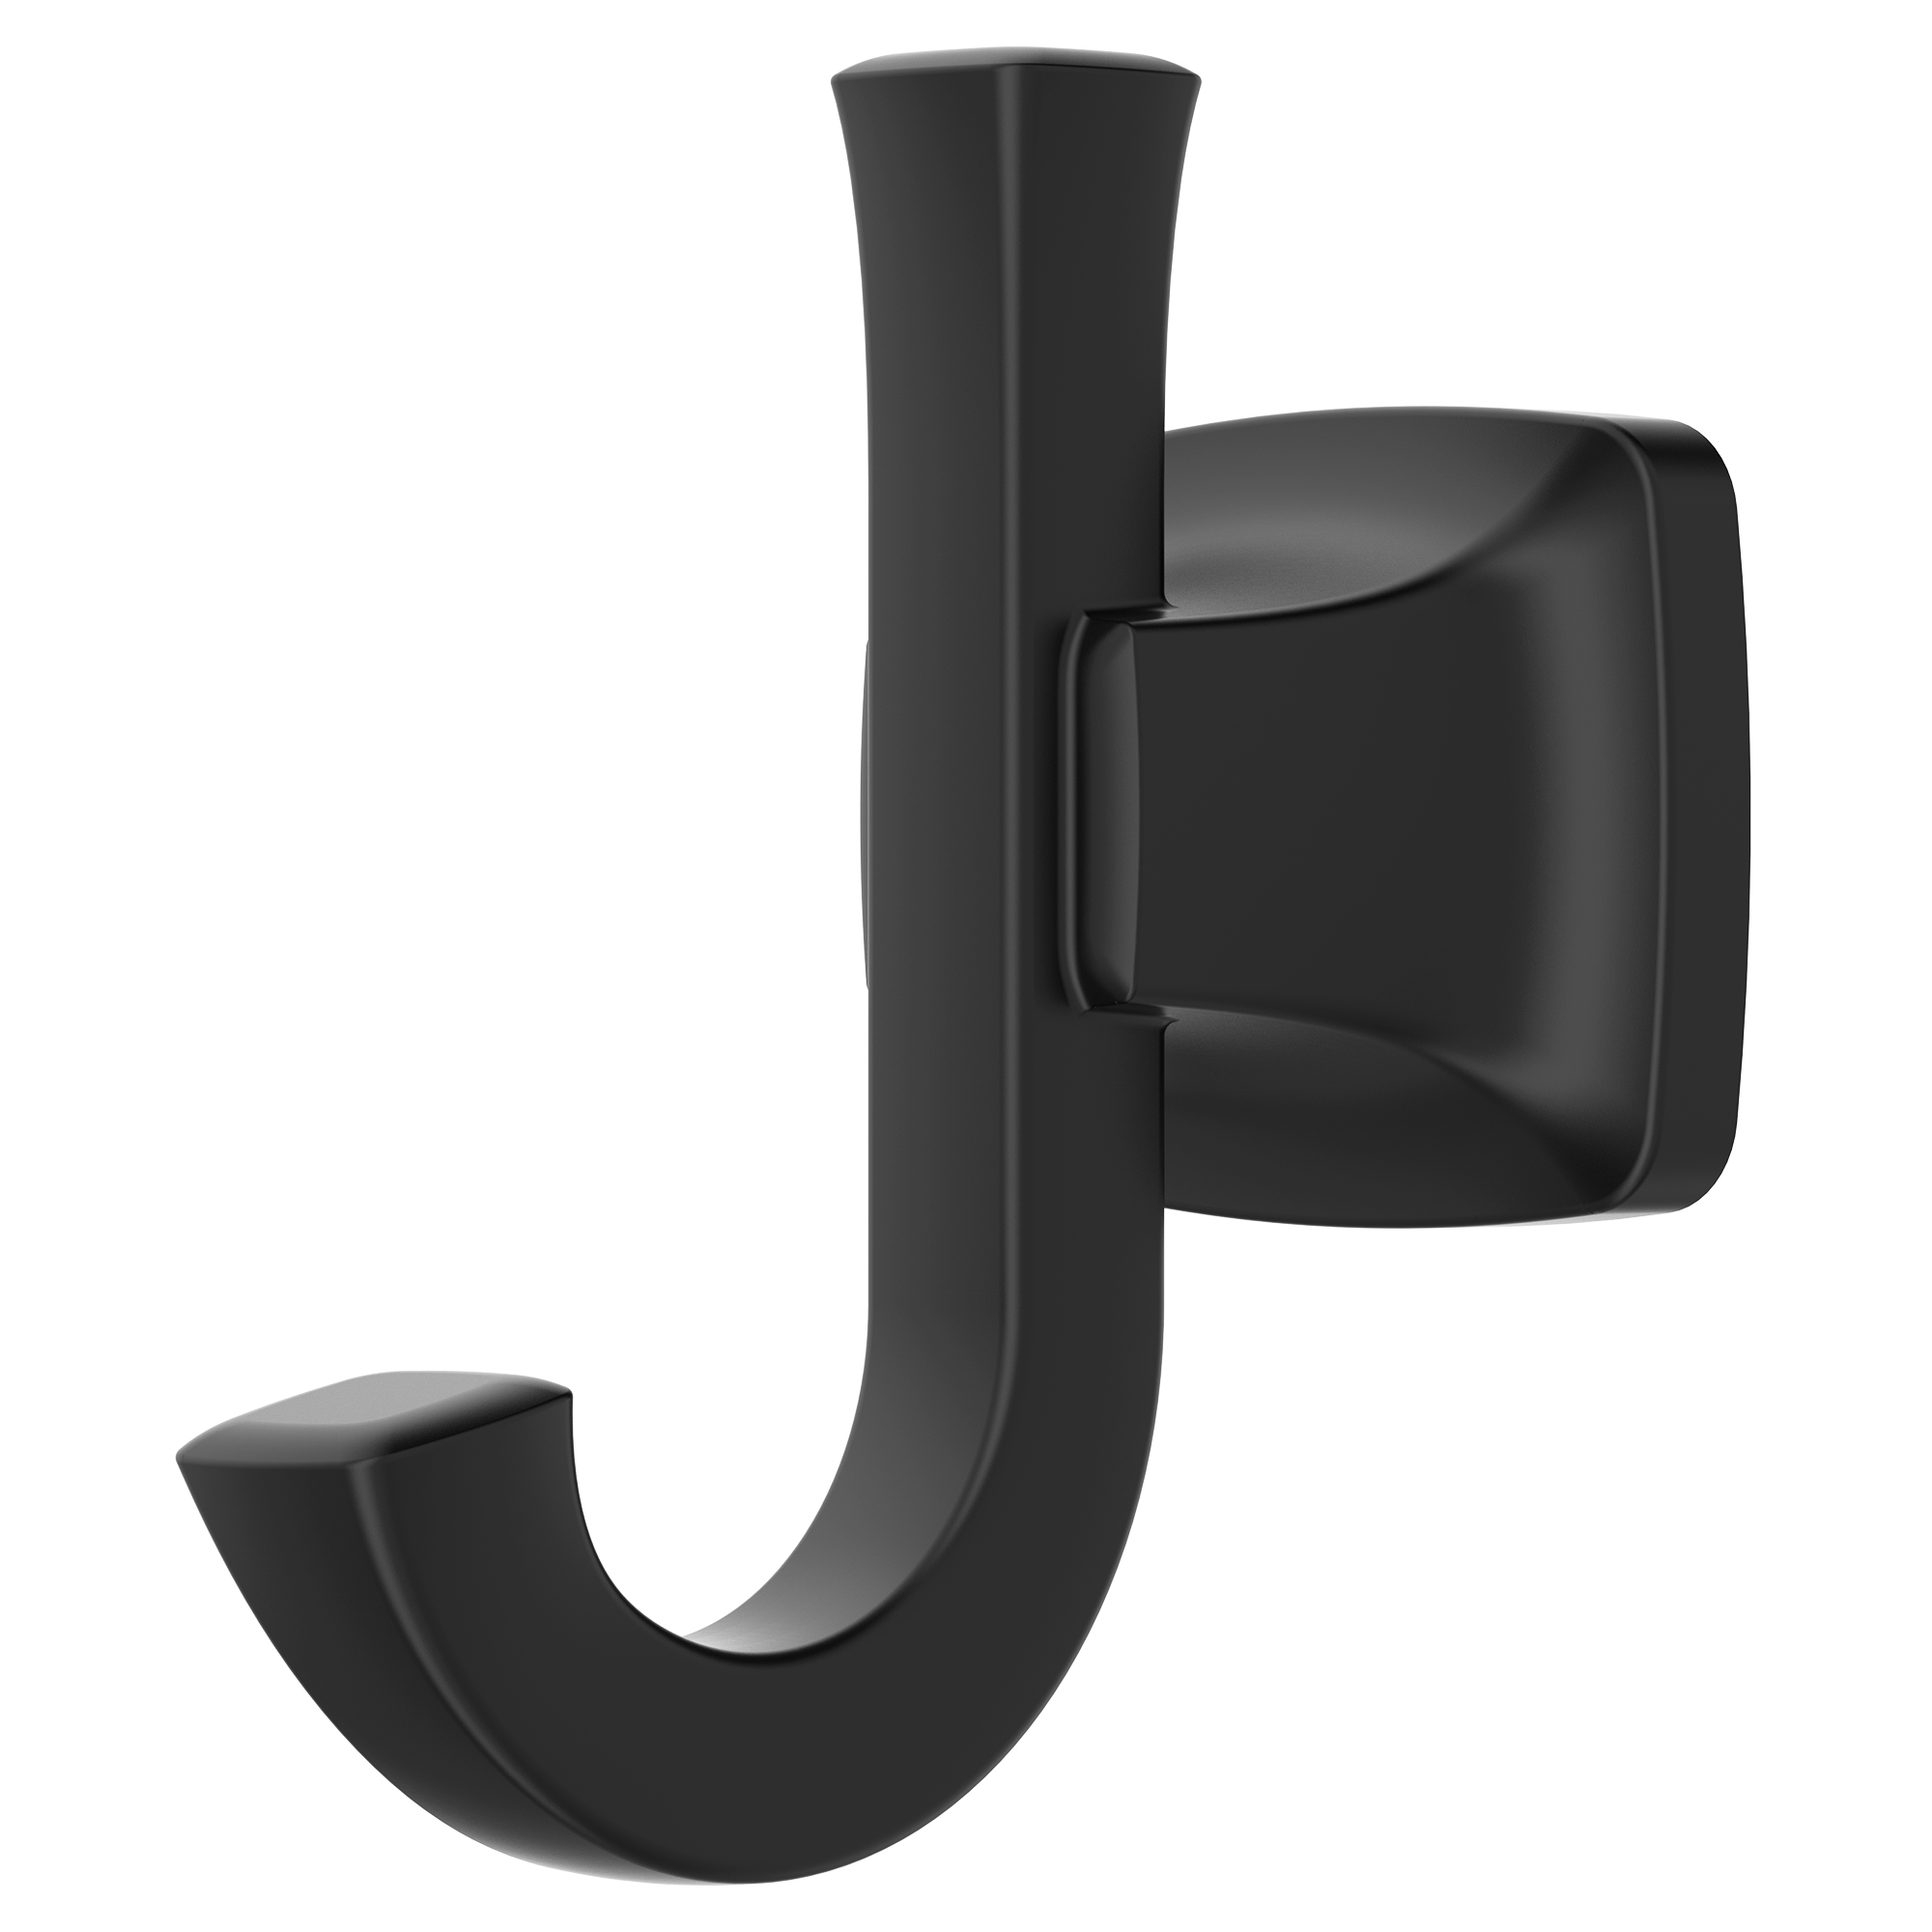 Townsend® Double Robe Hook